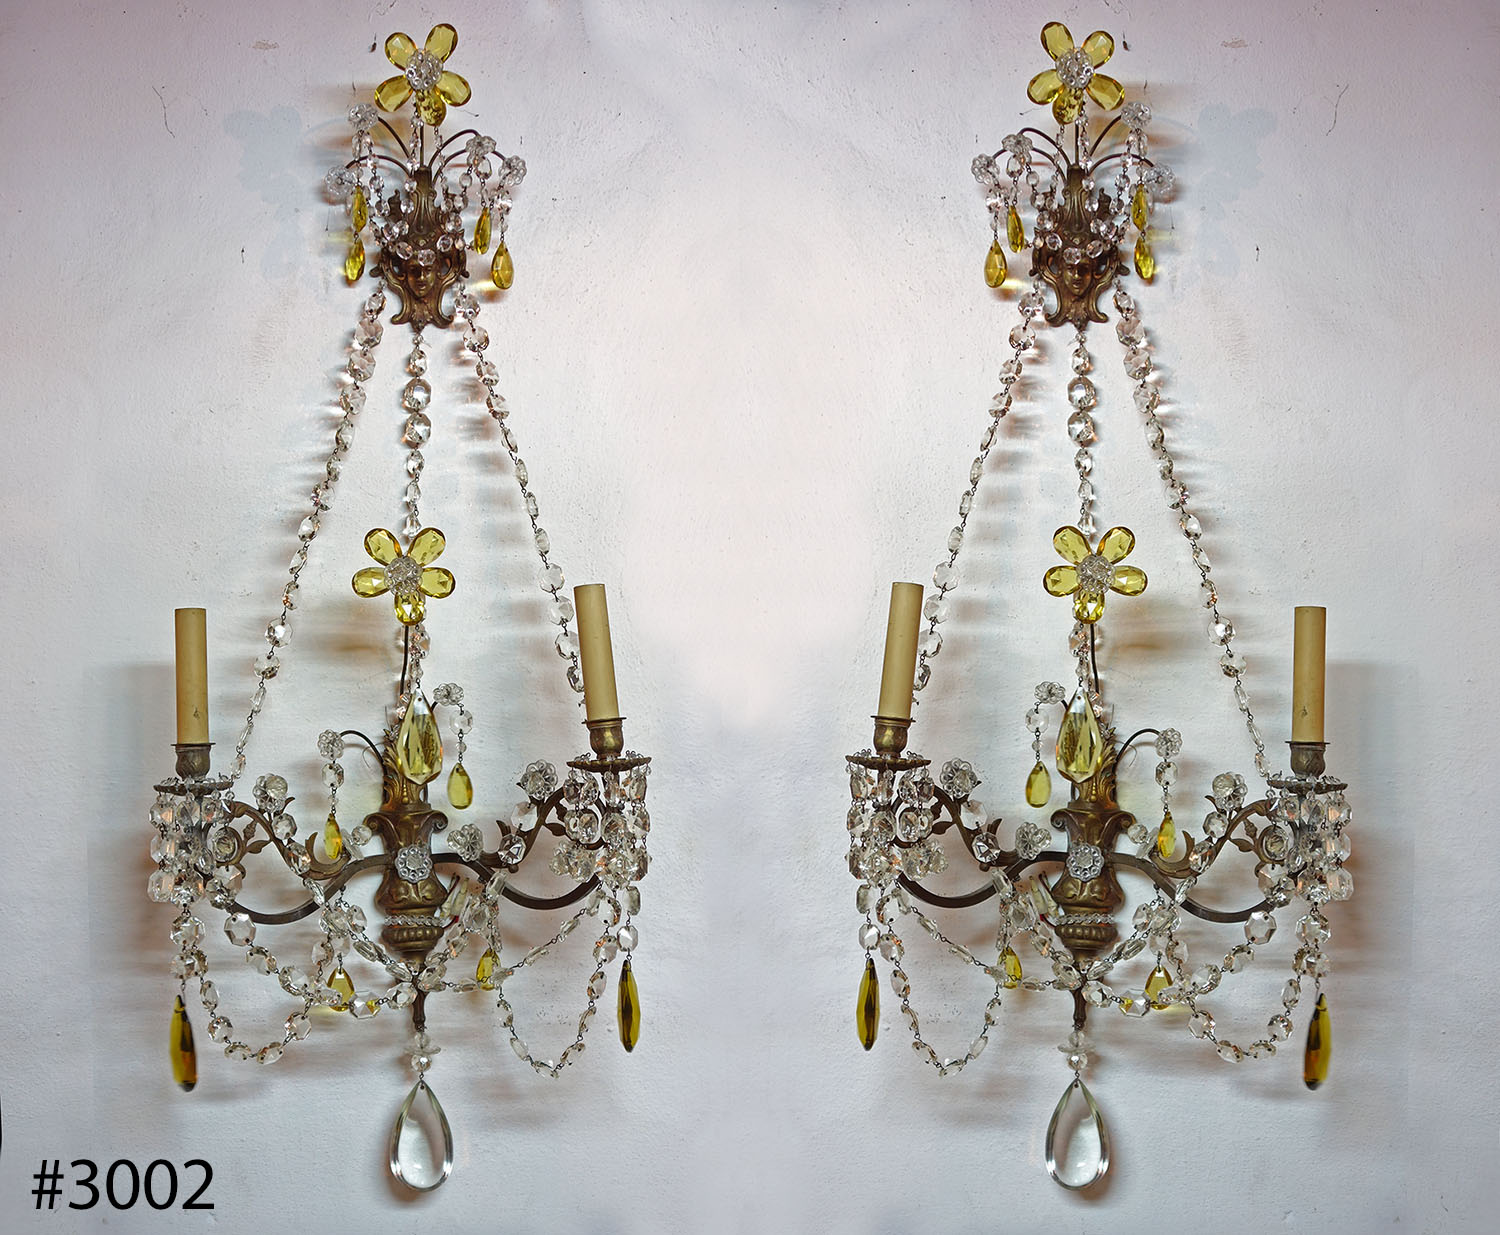 A pair of French Maison Jansen cut-glass and gilt-bronze sconces. Ca 1900. (match with lot763)